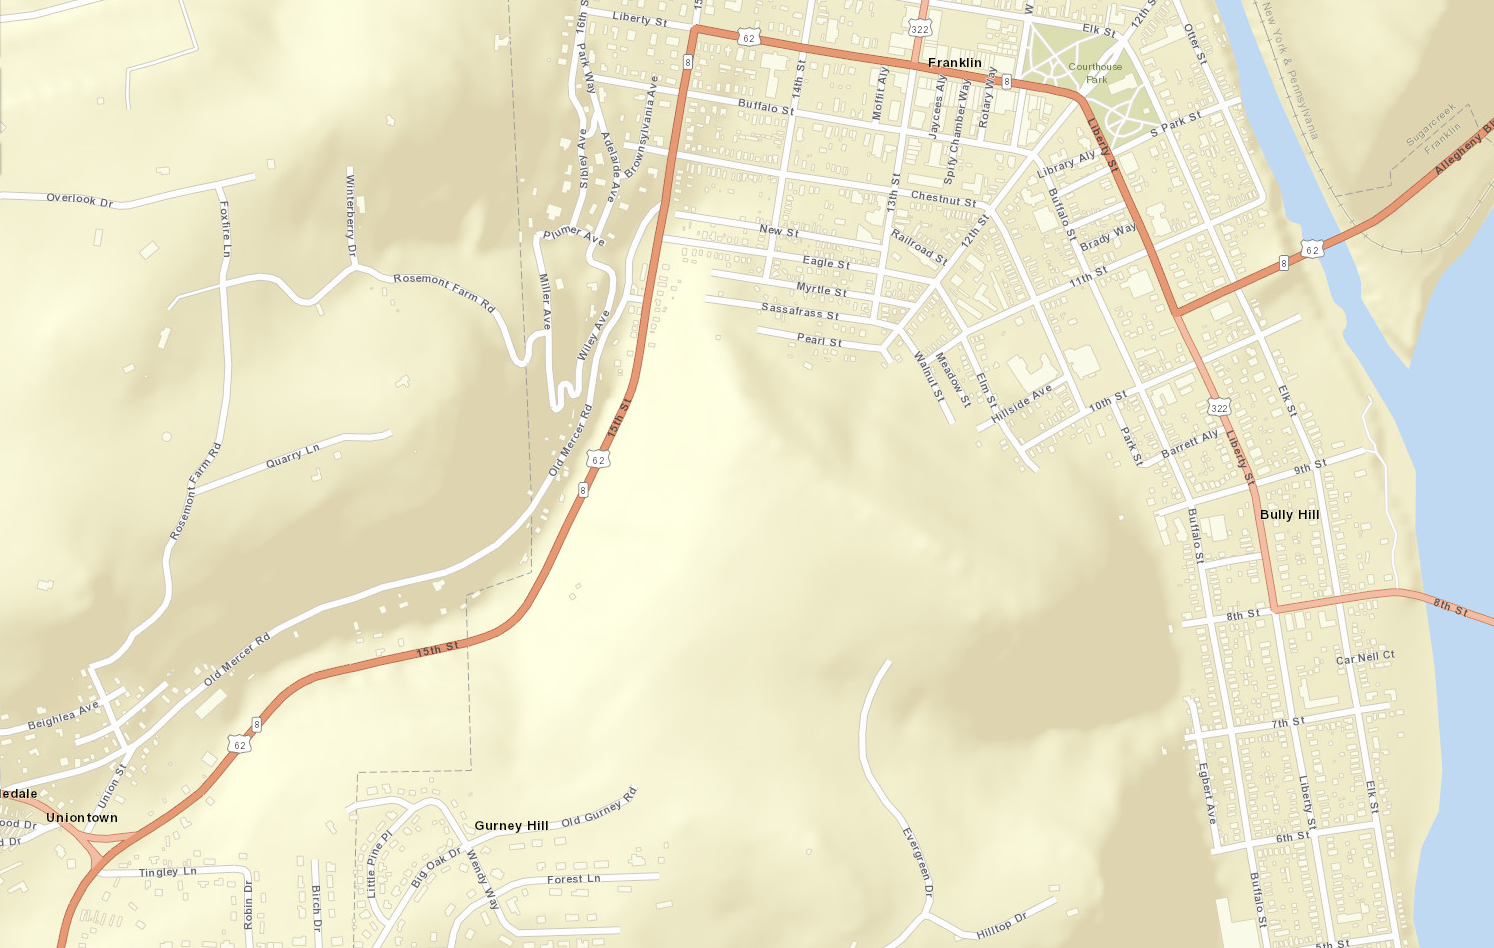 Map of Route 62-322 in Franklin, Venango County.